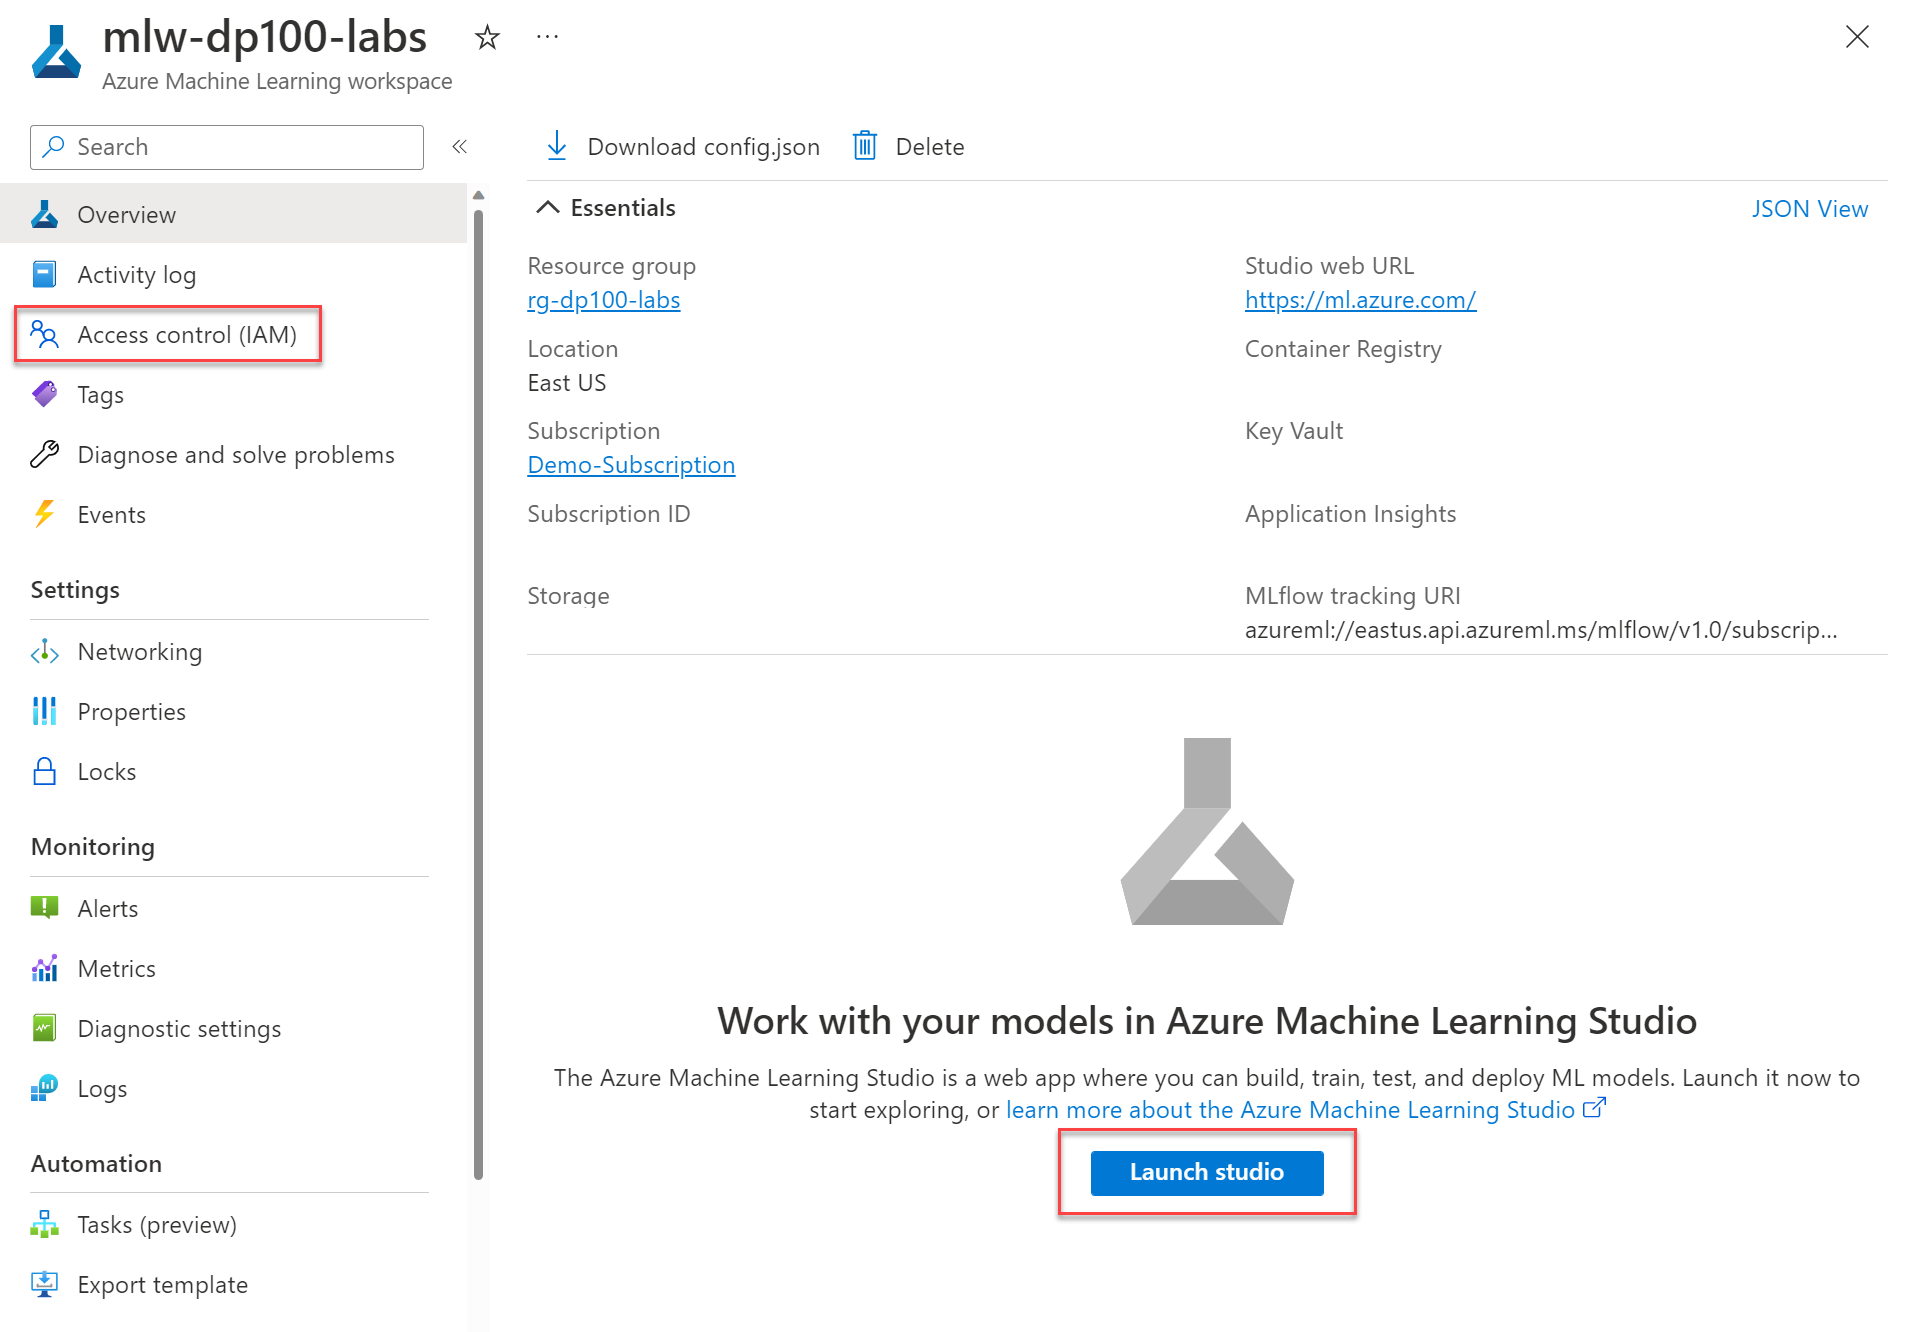 Screenshot of the overview page of the Azure Machine Learning workspace in the Azure portal.